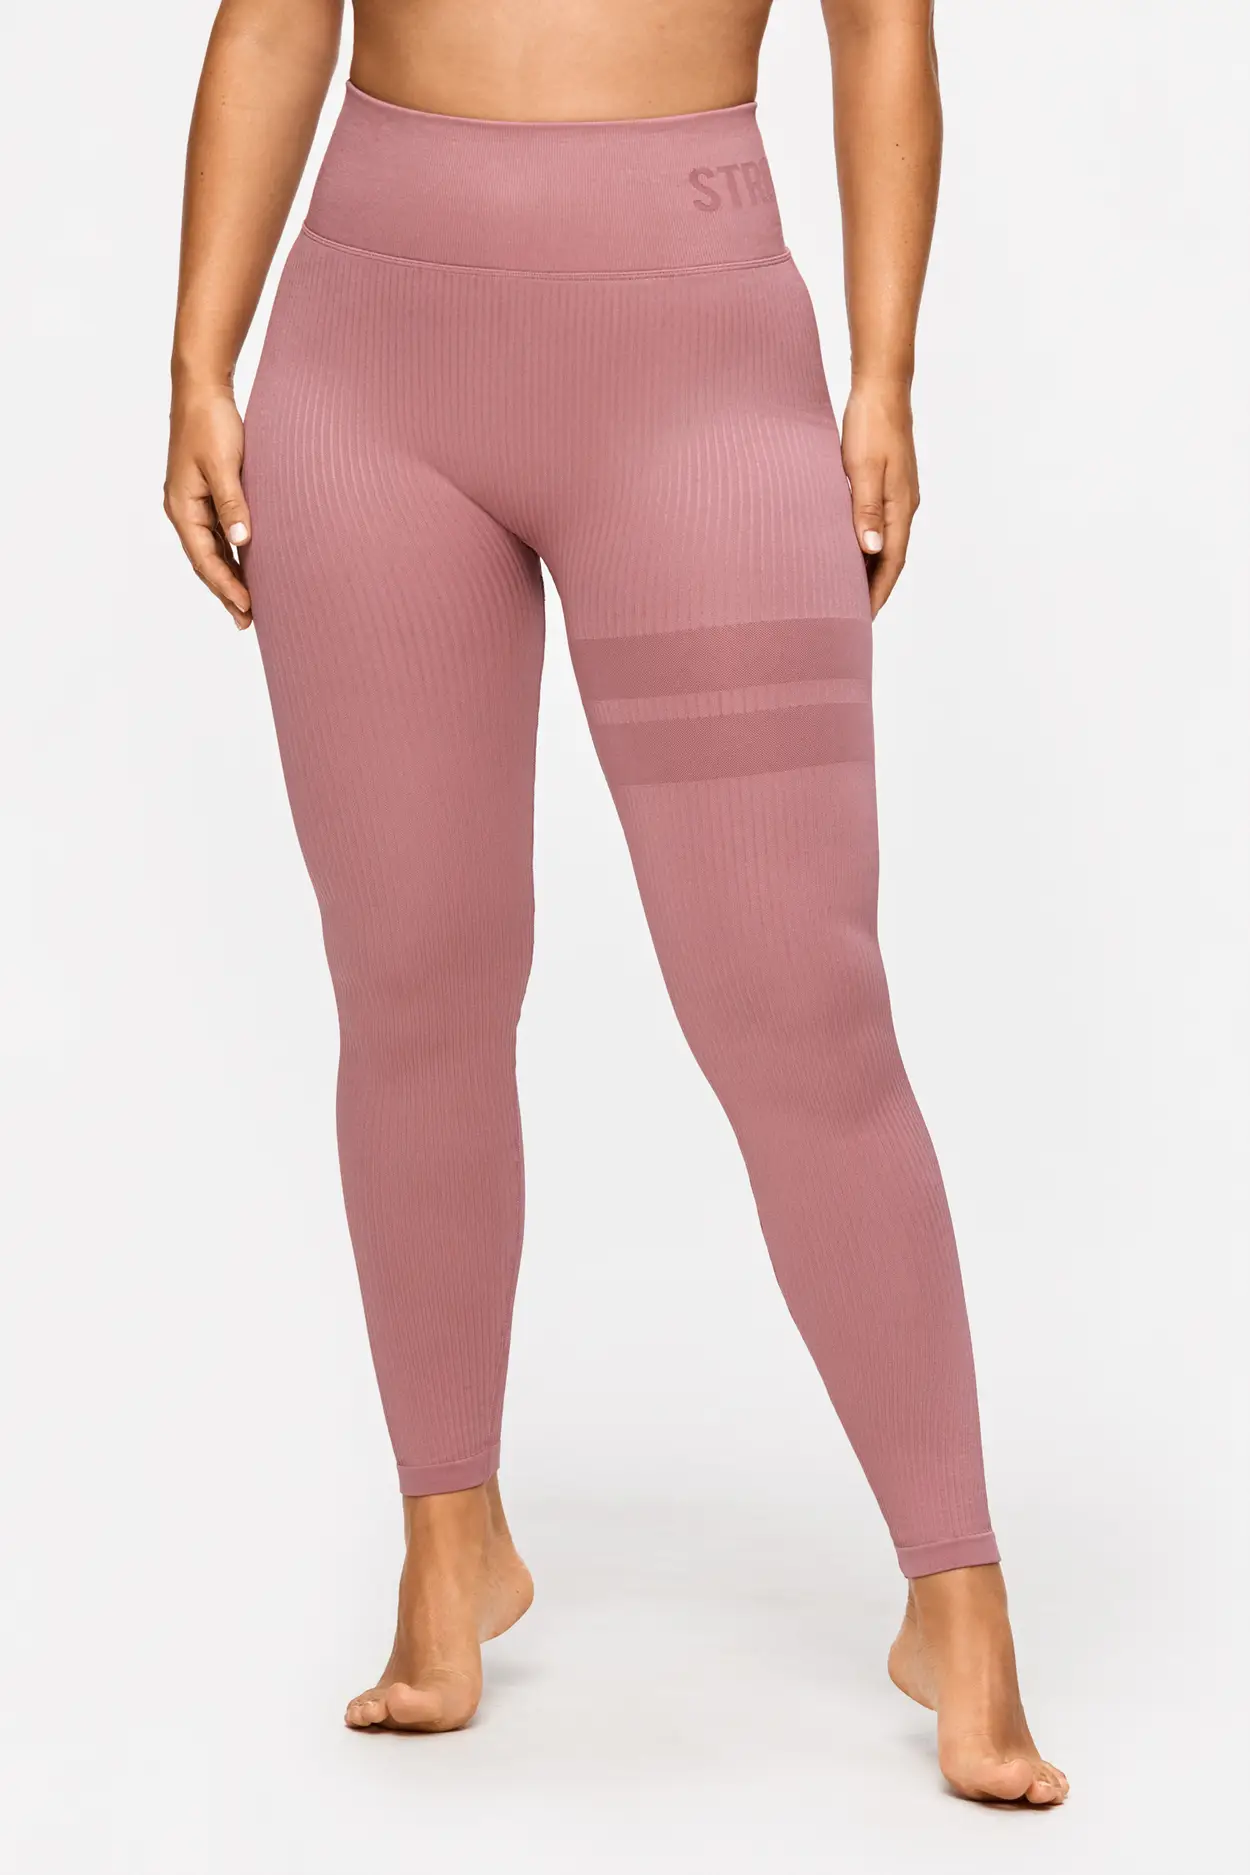 Seamless leggings have never looked and felt so good. CSB Seamless